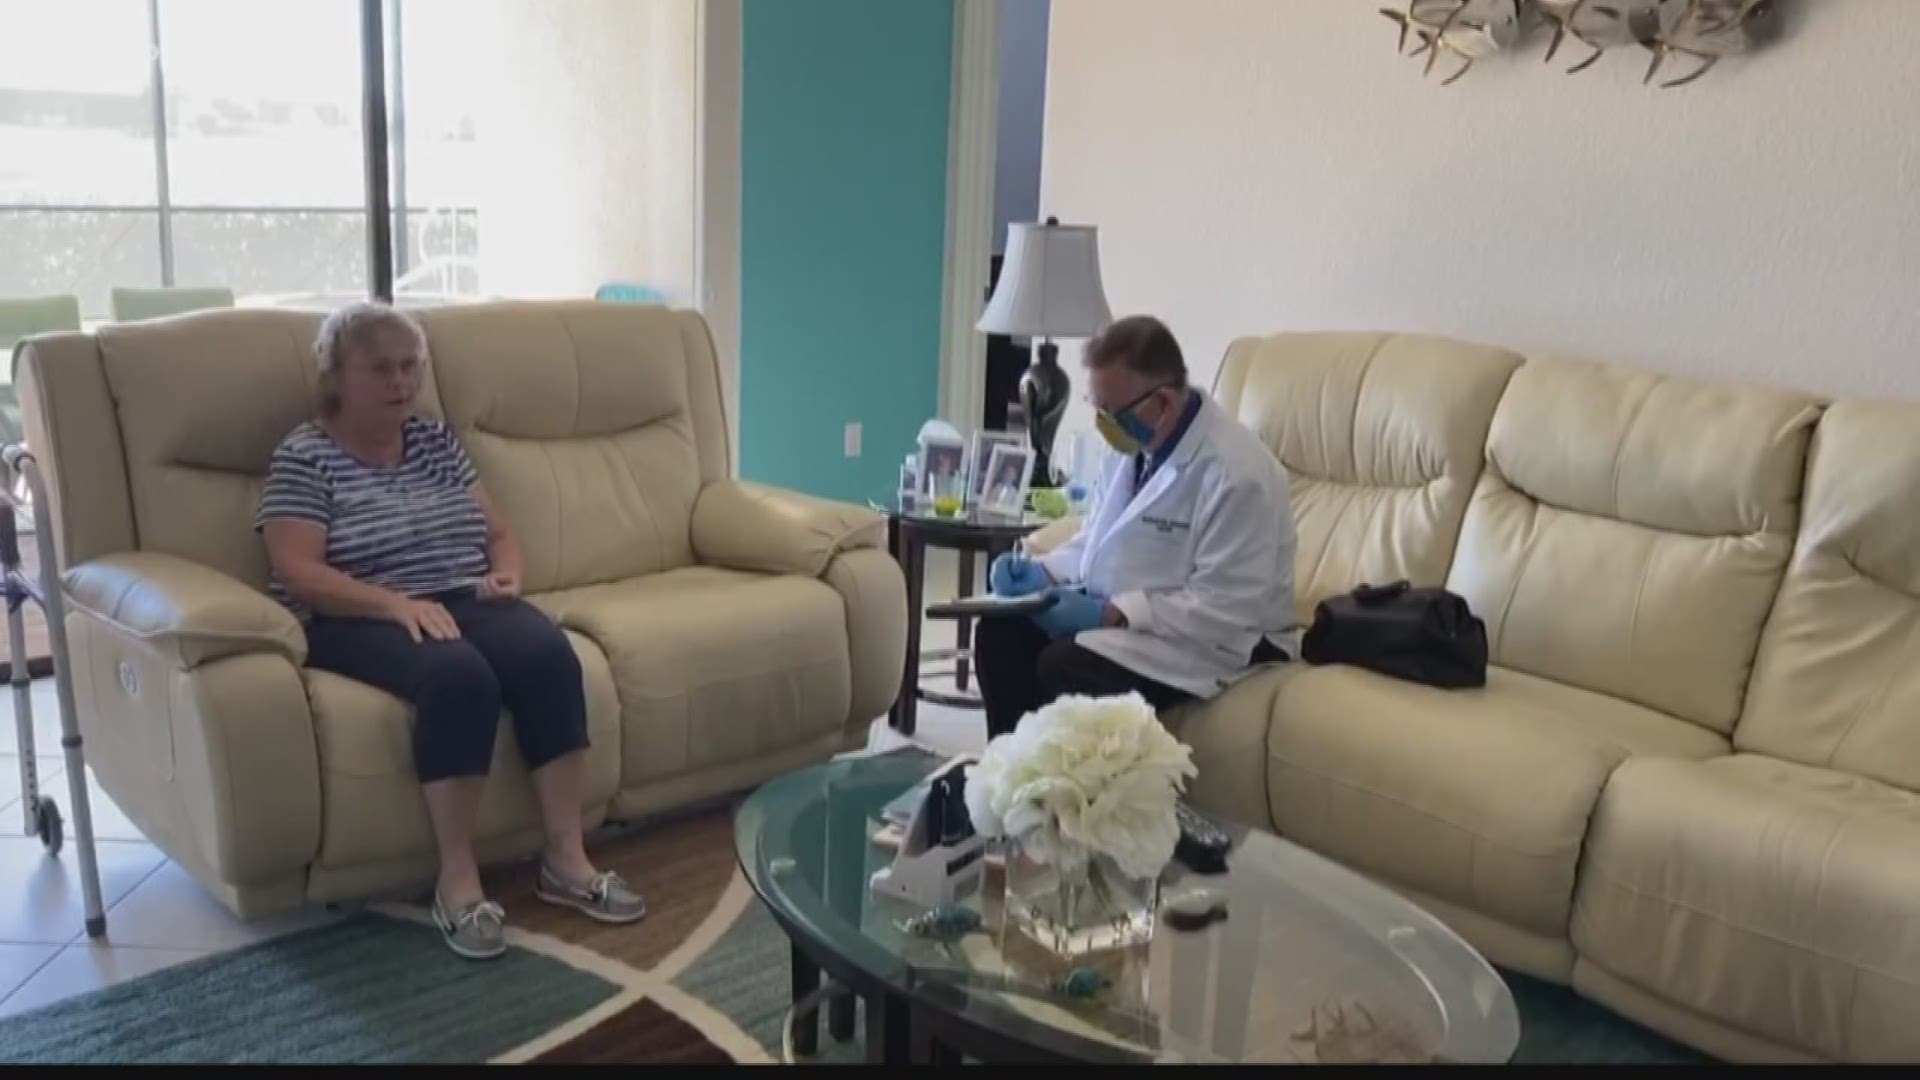 When Manatee County physician James Floyd shifted his focus to home visits in August 2019, he knew there was a real need for his service.